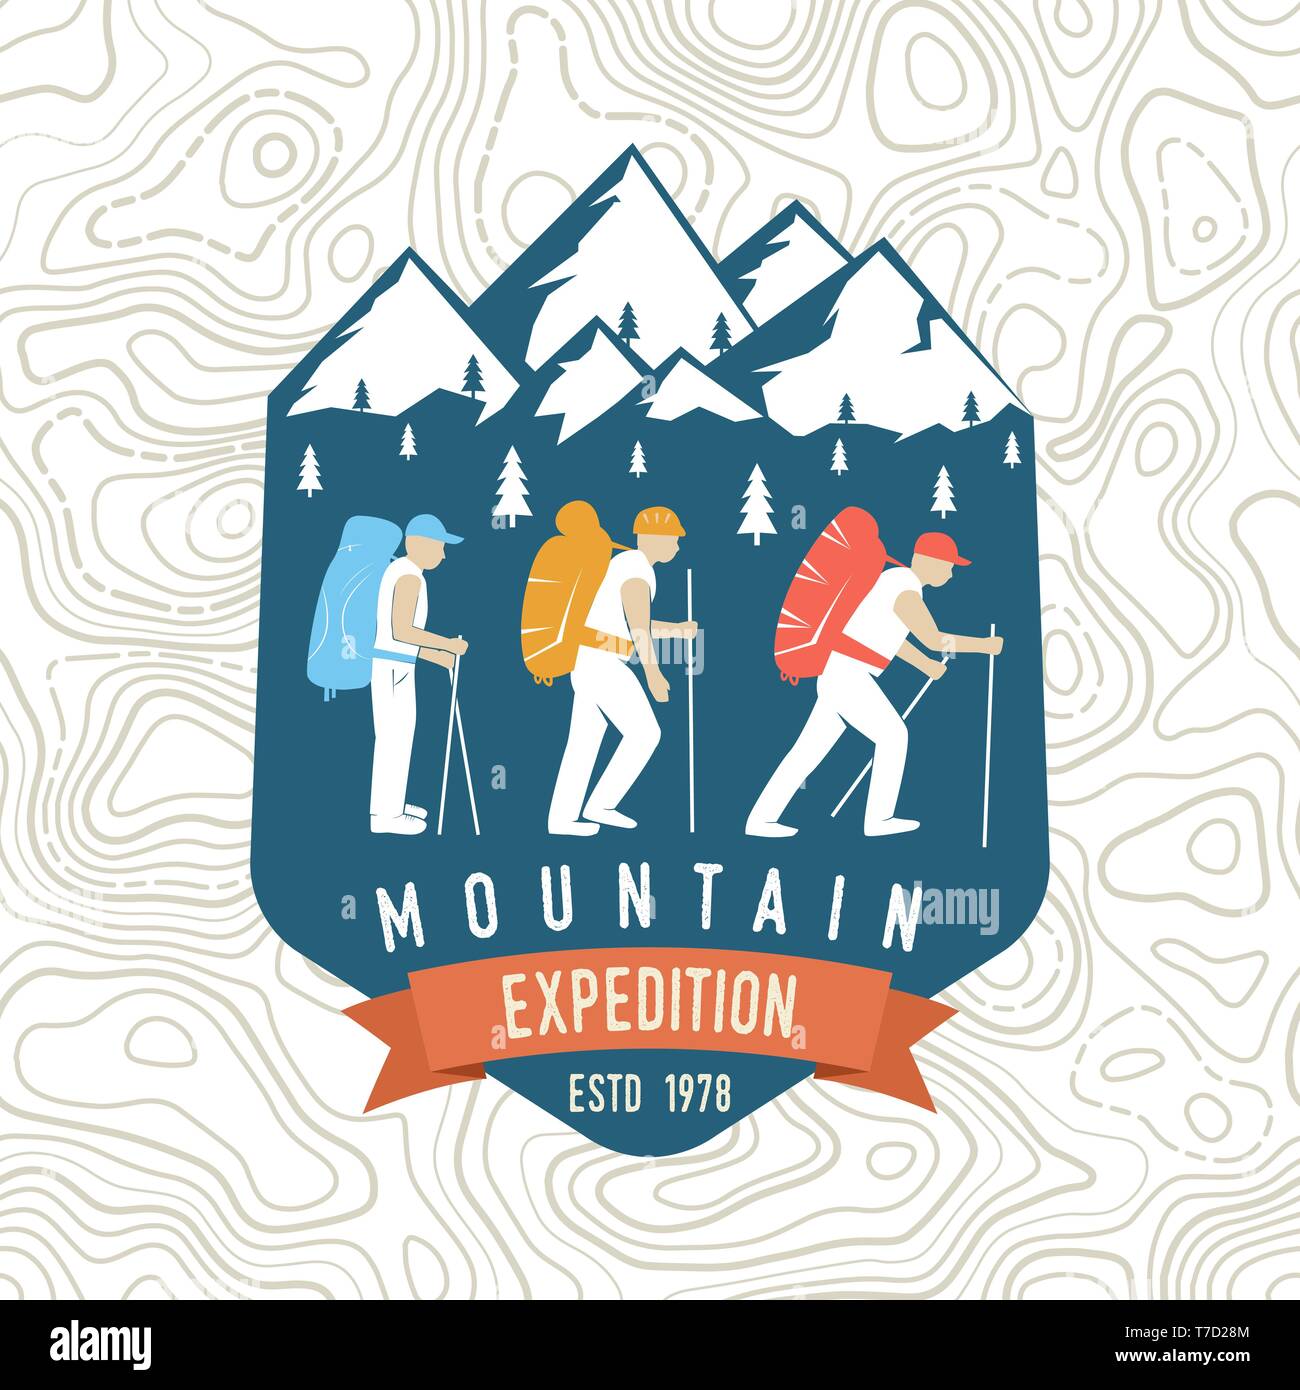 Mountain expedition patch. Vector illustration. Concept for shirt or badge, print, stamp or tee. Vintage typography design with mountaineers and mountain silhouette. Stock Vector